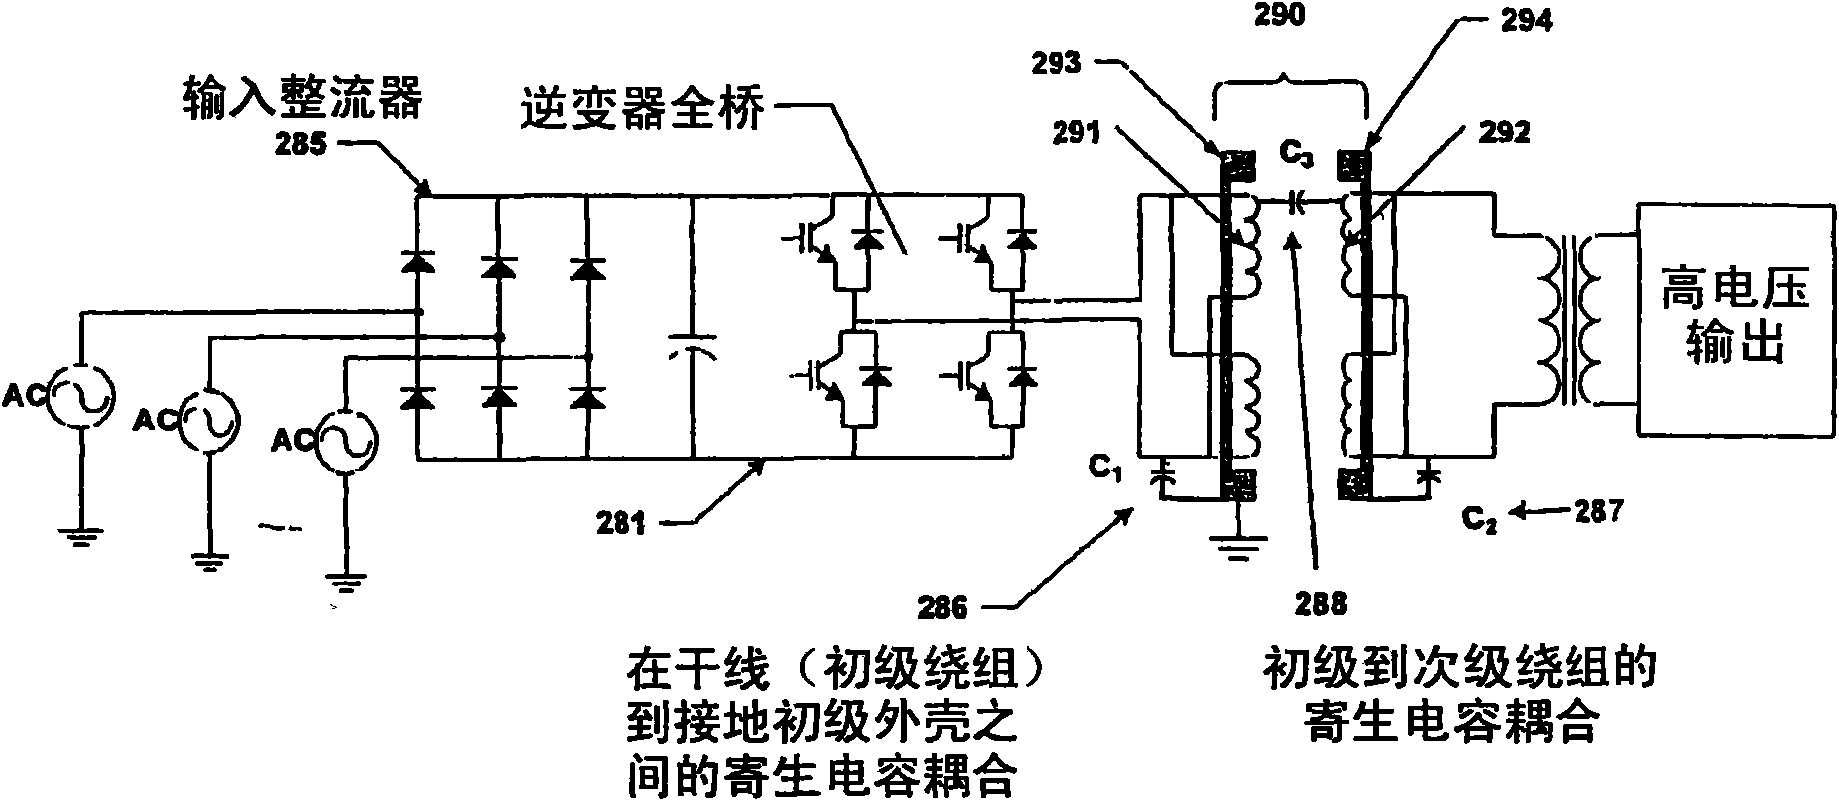 Non-contact rotary power transfer system